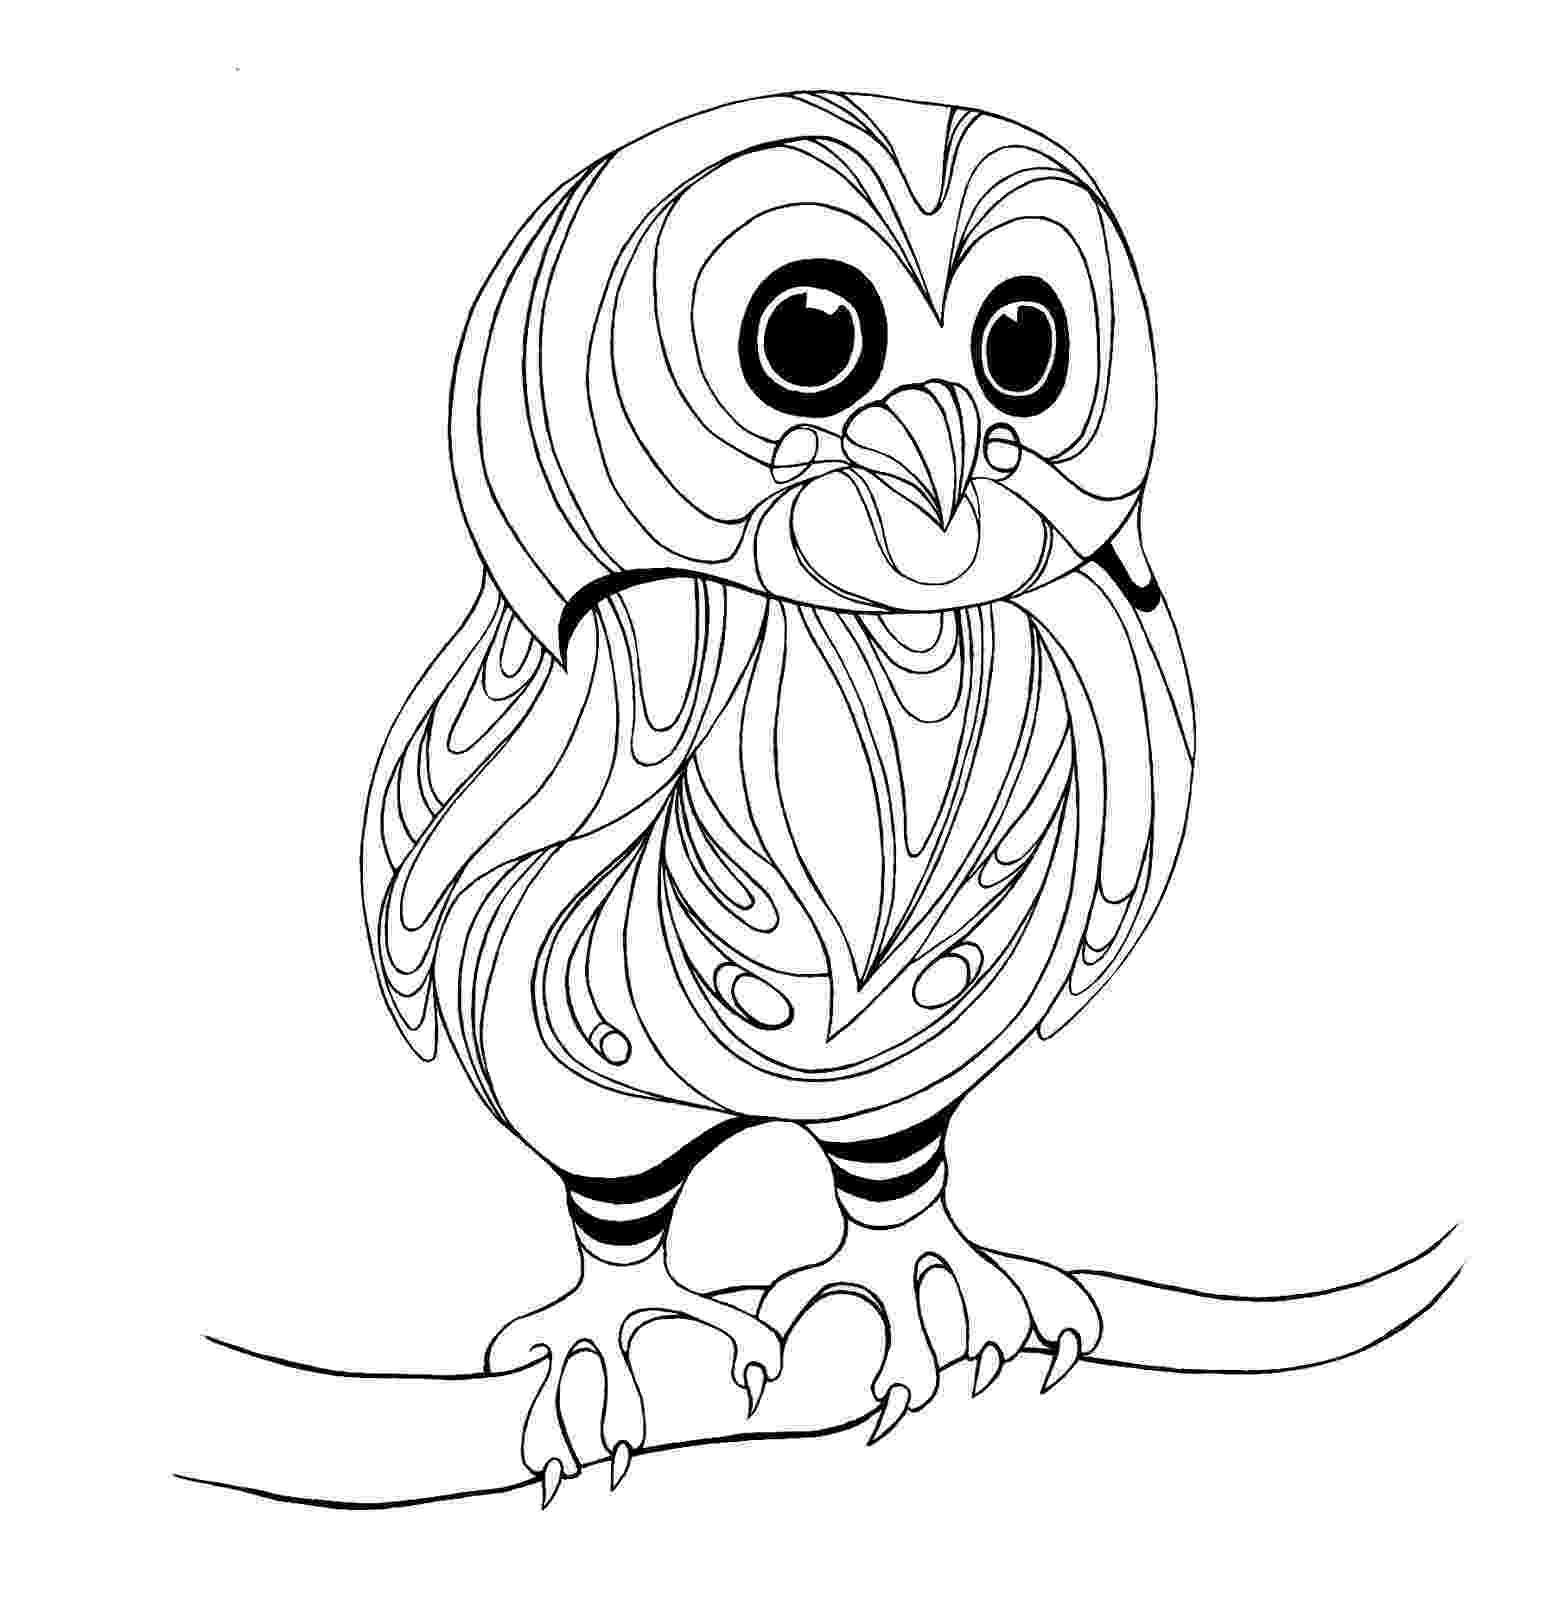 owl coloring sheet owl coloring pages for adults free detailed owl coloring sheet owl coloring 